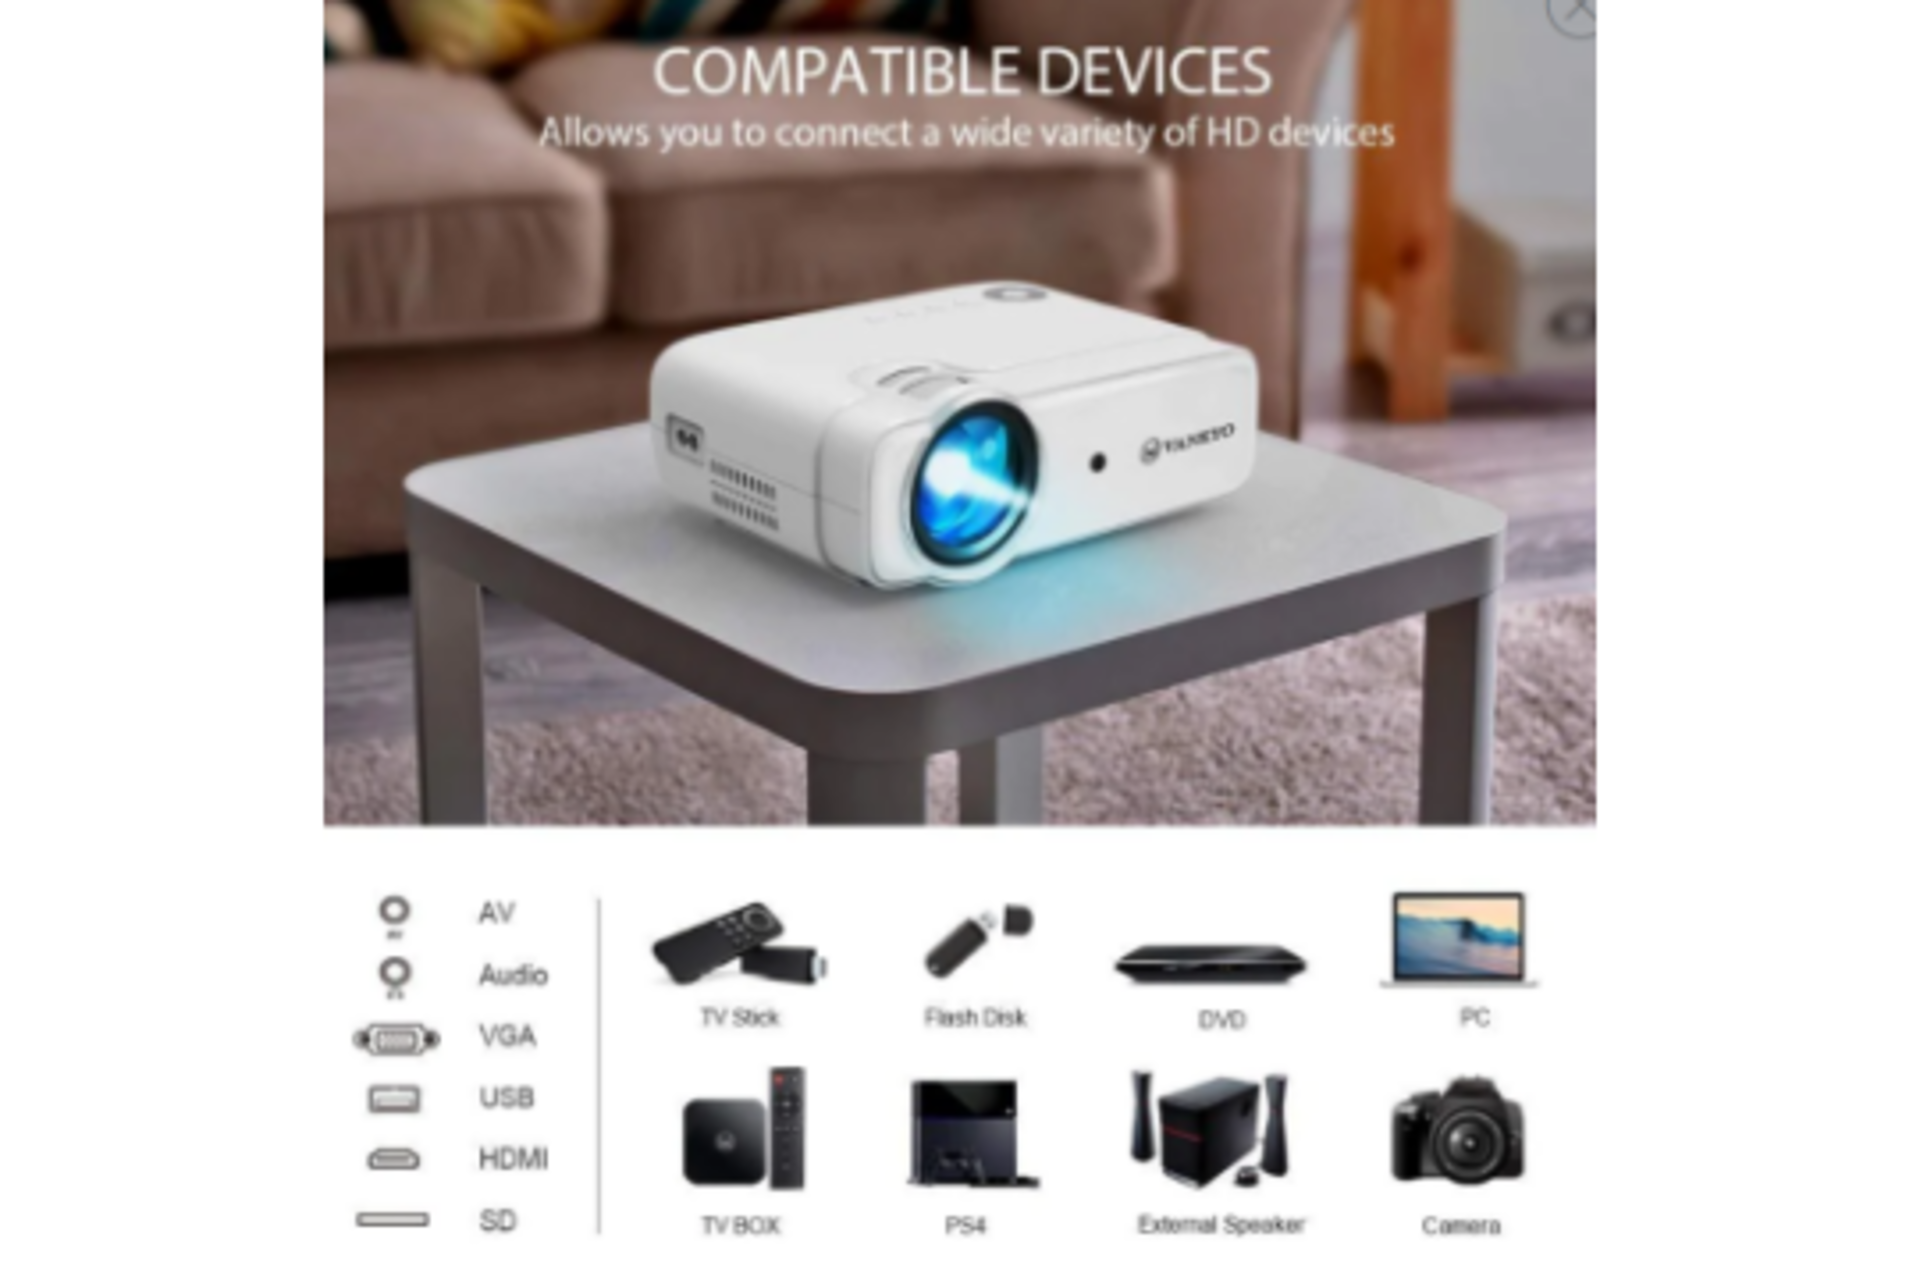 New Boxed VANKYO Leisure 430 Mini Projector for Movie, Outdoor Entertainment, Native 720P. 236” - Image 3 of 3